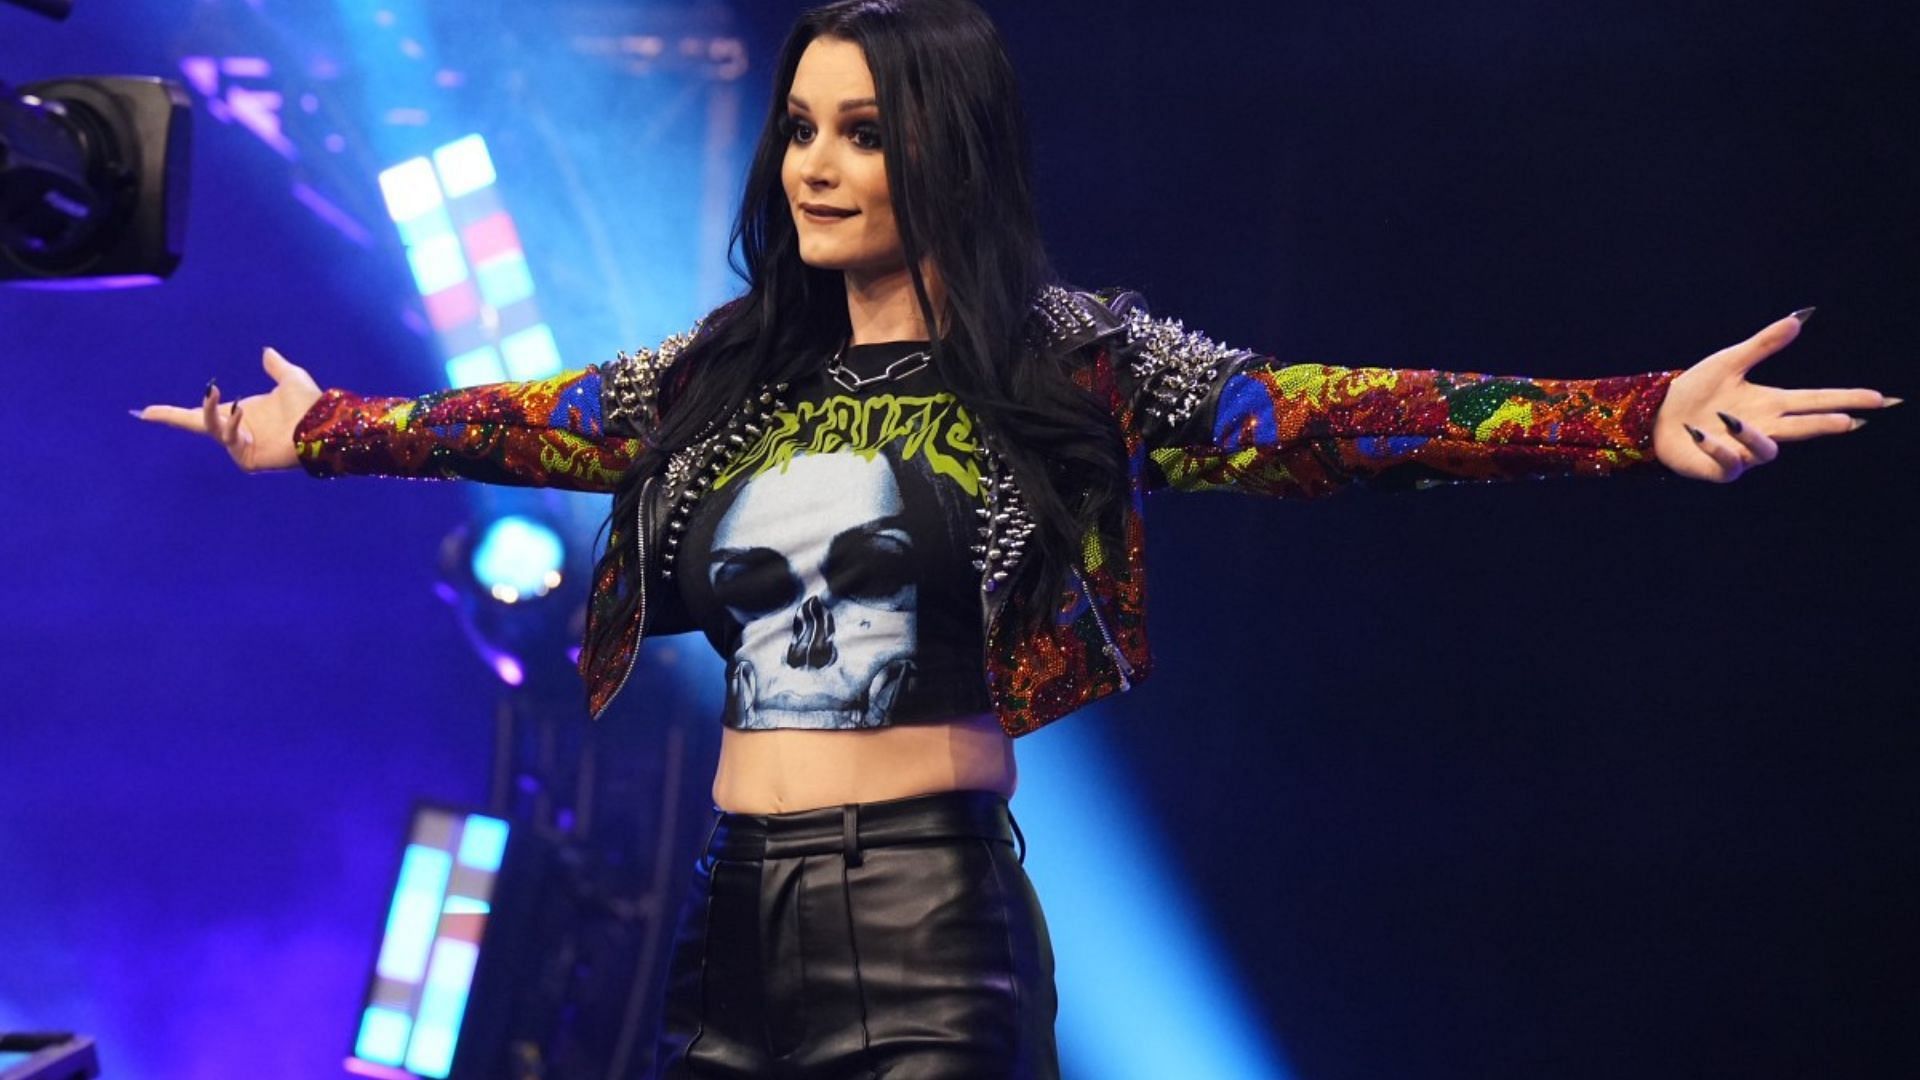 Saraya currently leads the Outcasts faction in AEW